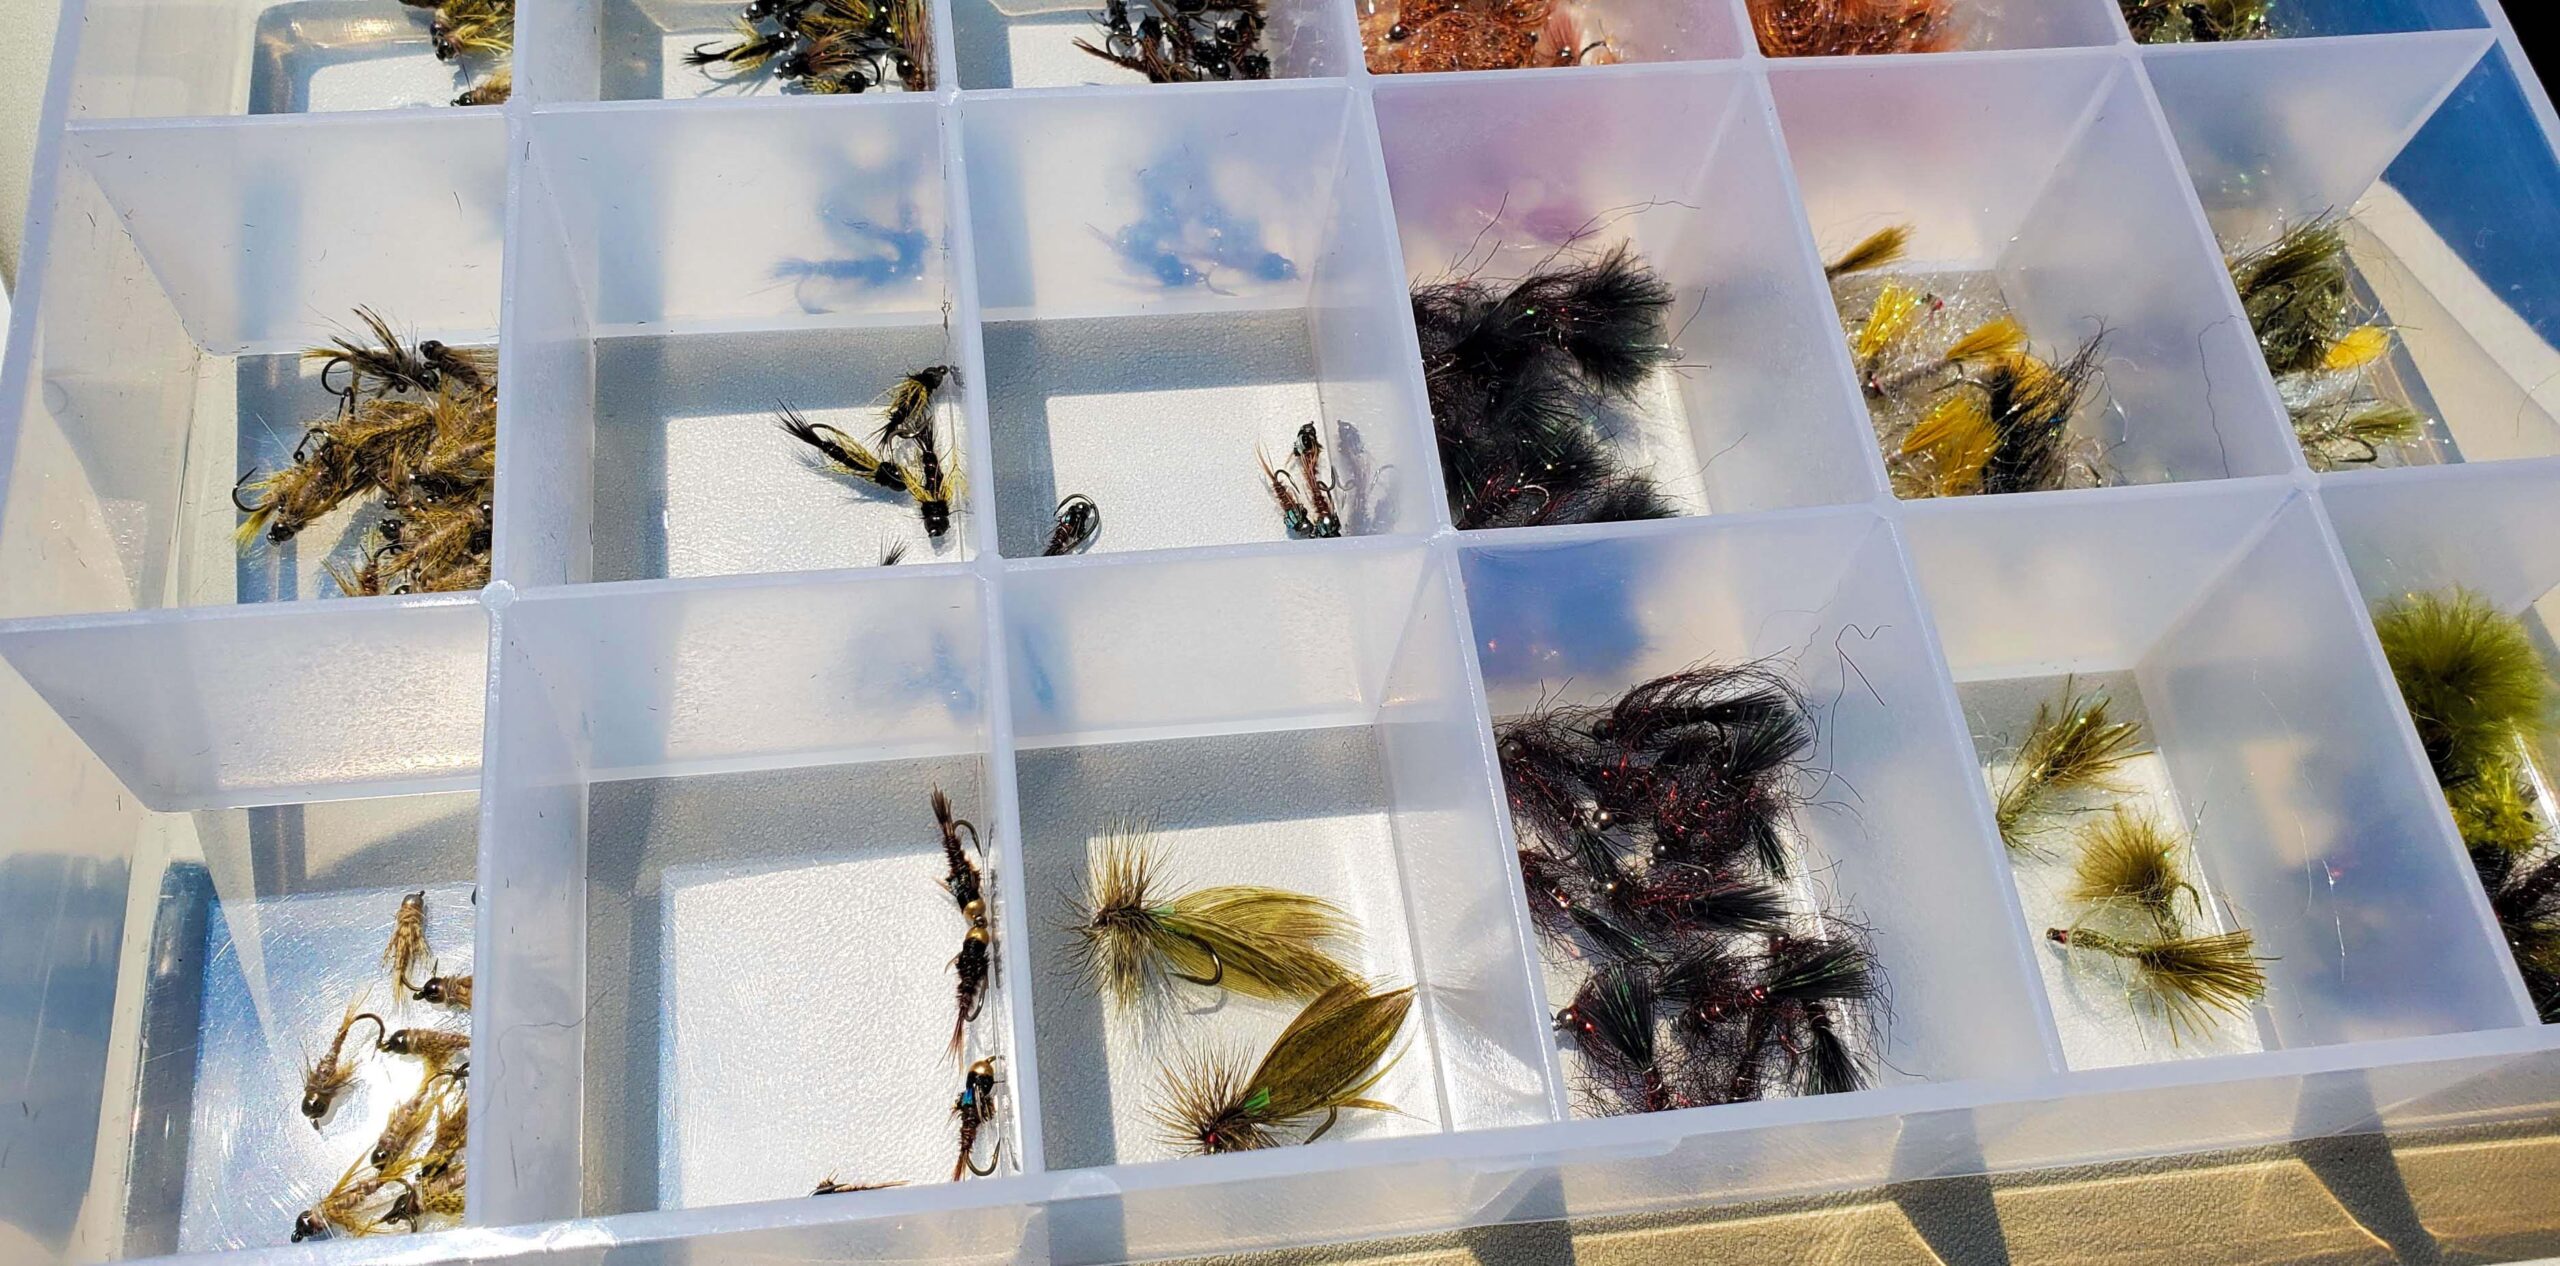 A clear fly box from an Eastern Sierra Fishing Guide full of fly fishing flies.